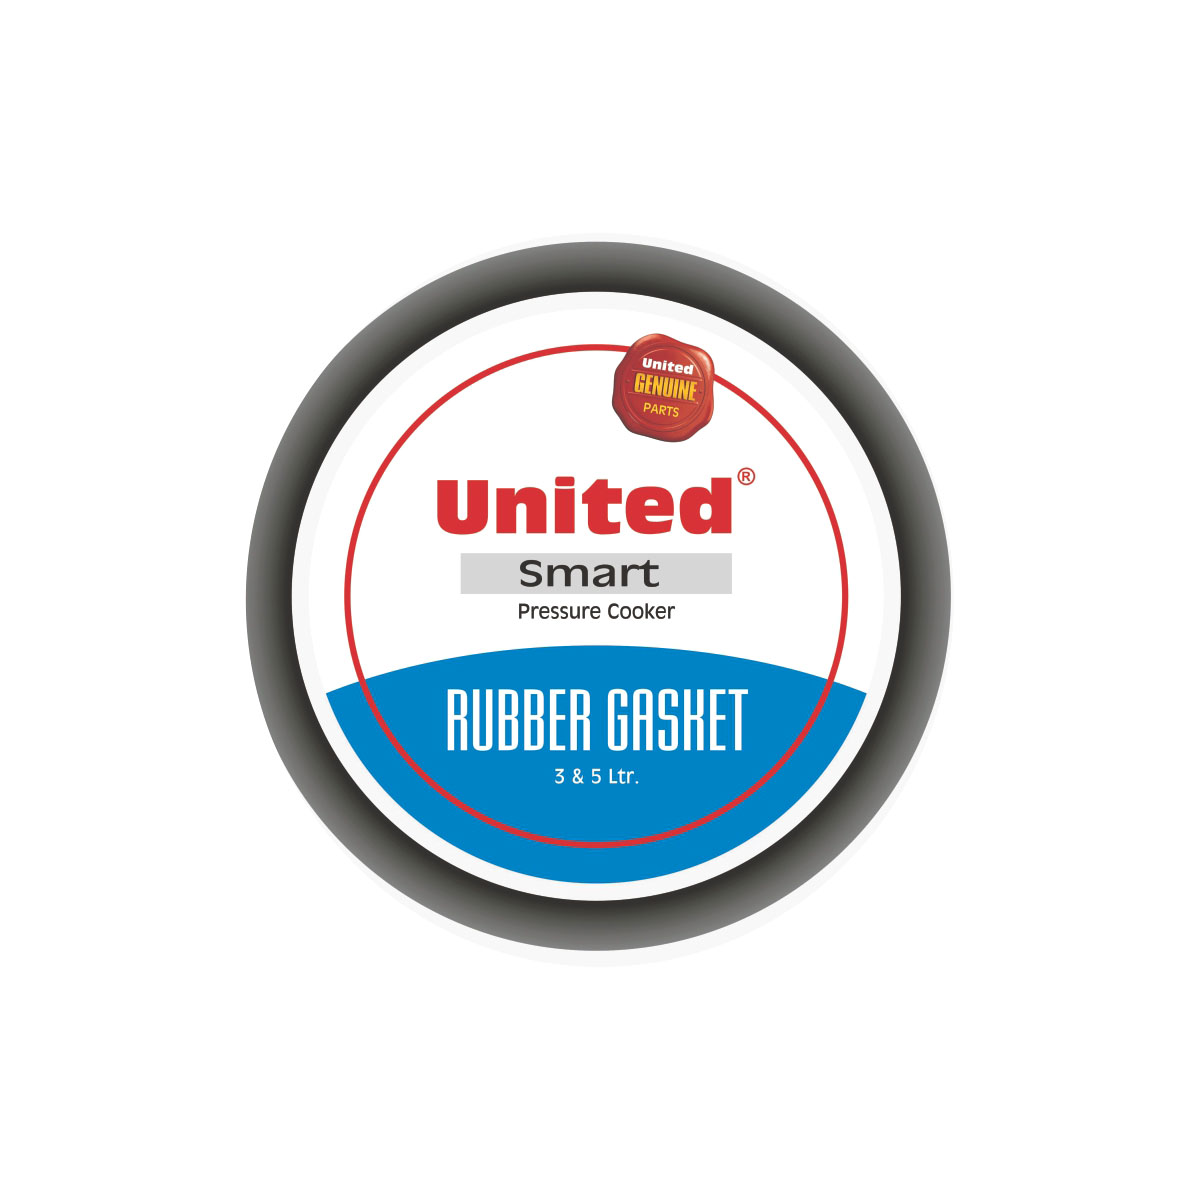 UNITED RUBBER GASKET TALL BODY 3 LTR (PACK OF 30 PCS)